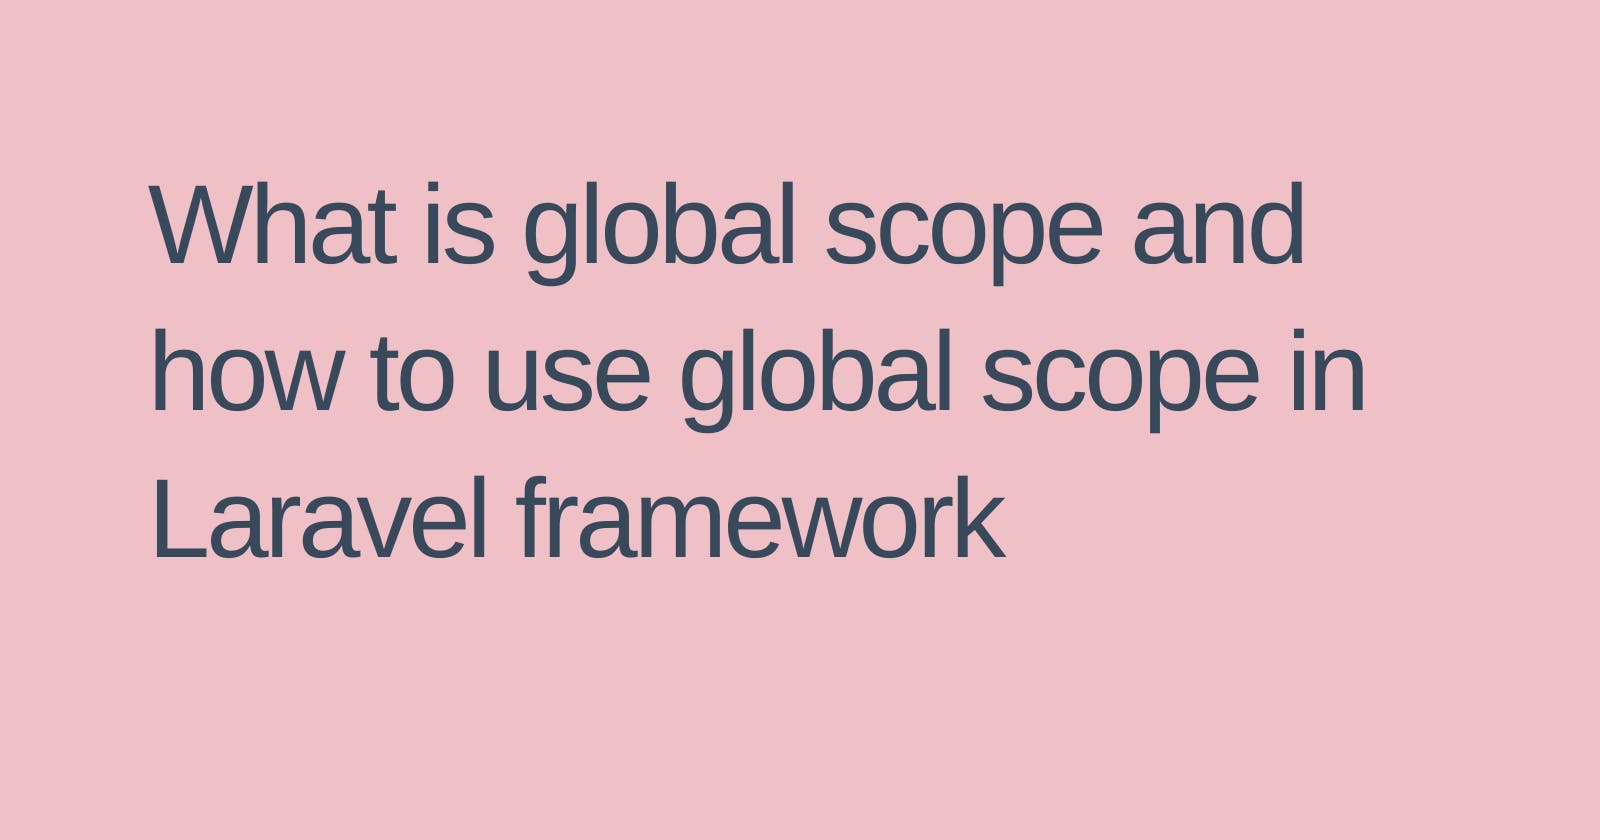 What is global scope and how to use global scope in Laravel framework